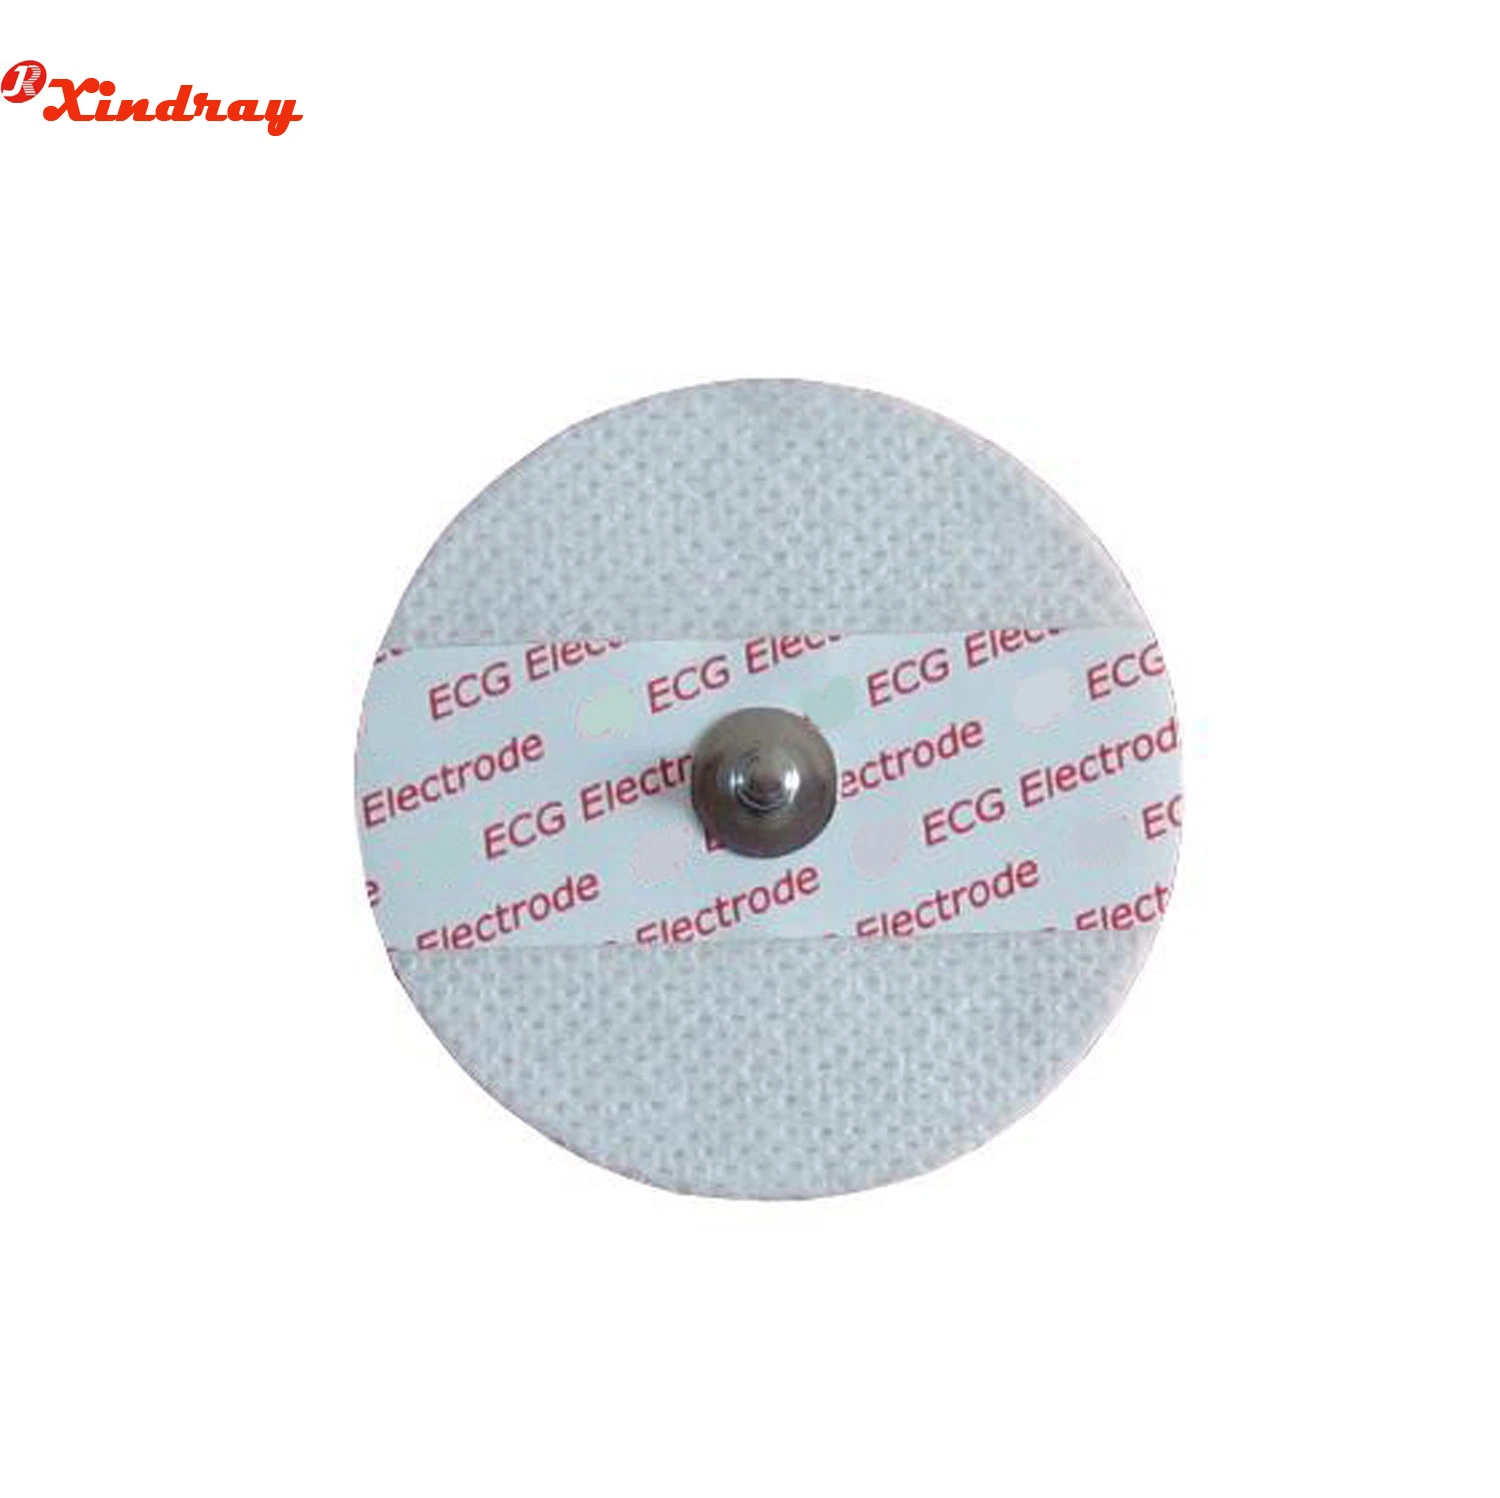 Factory Price Hospital Medical Supplies Disposable Dry ECG Electrodes